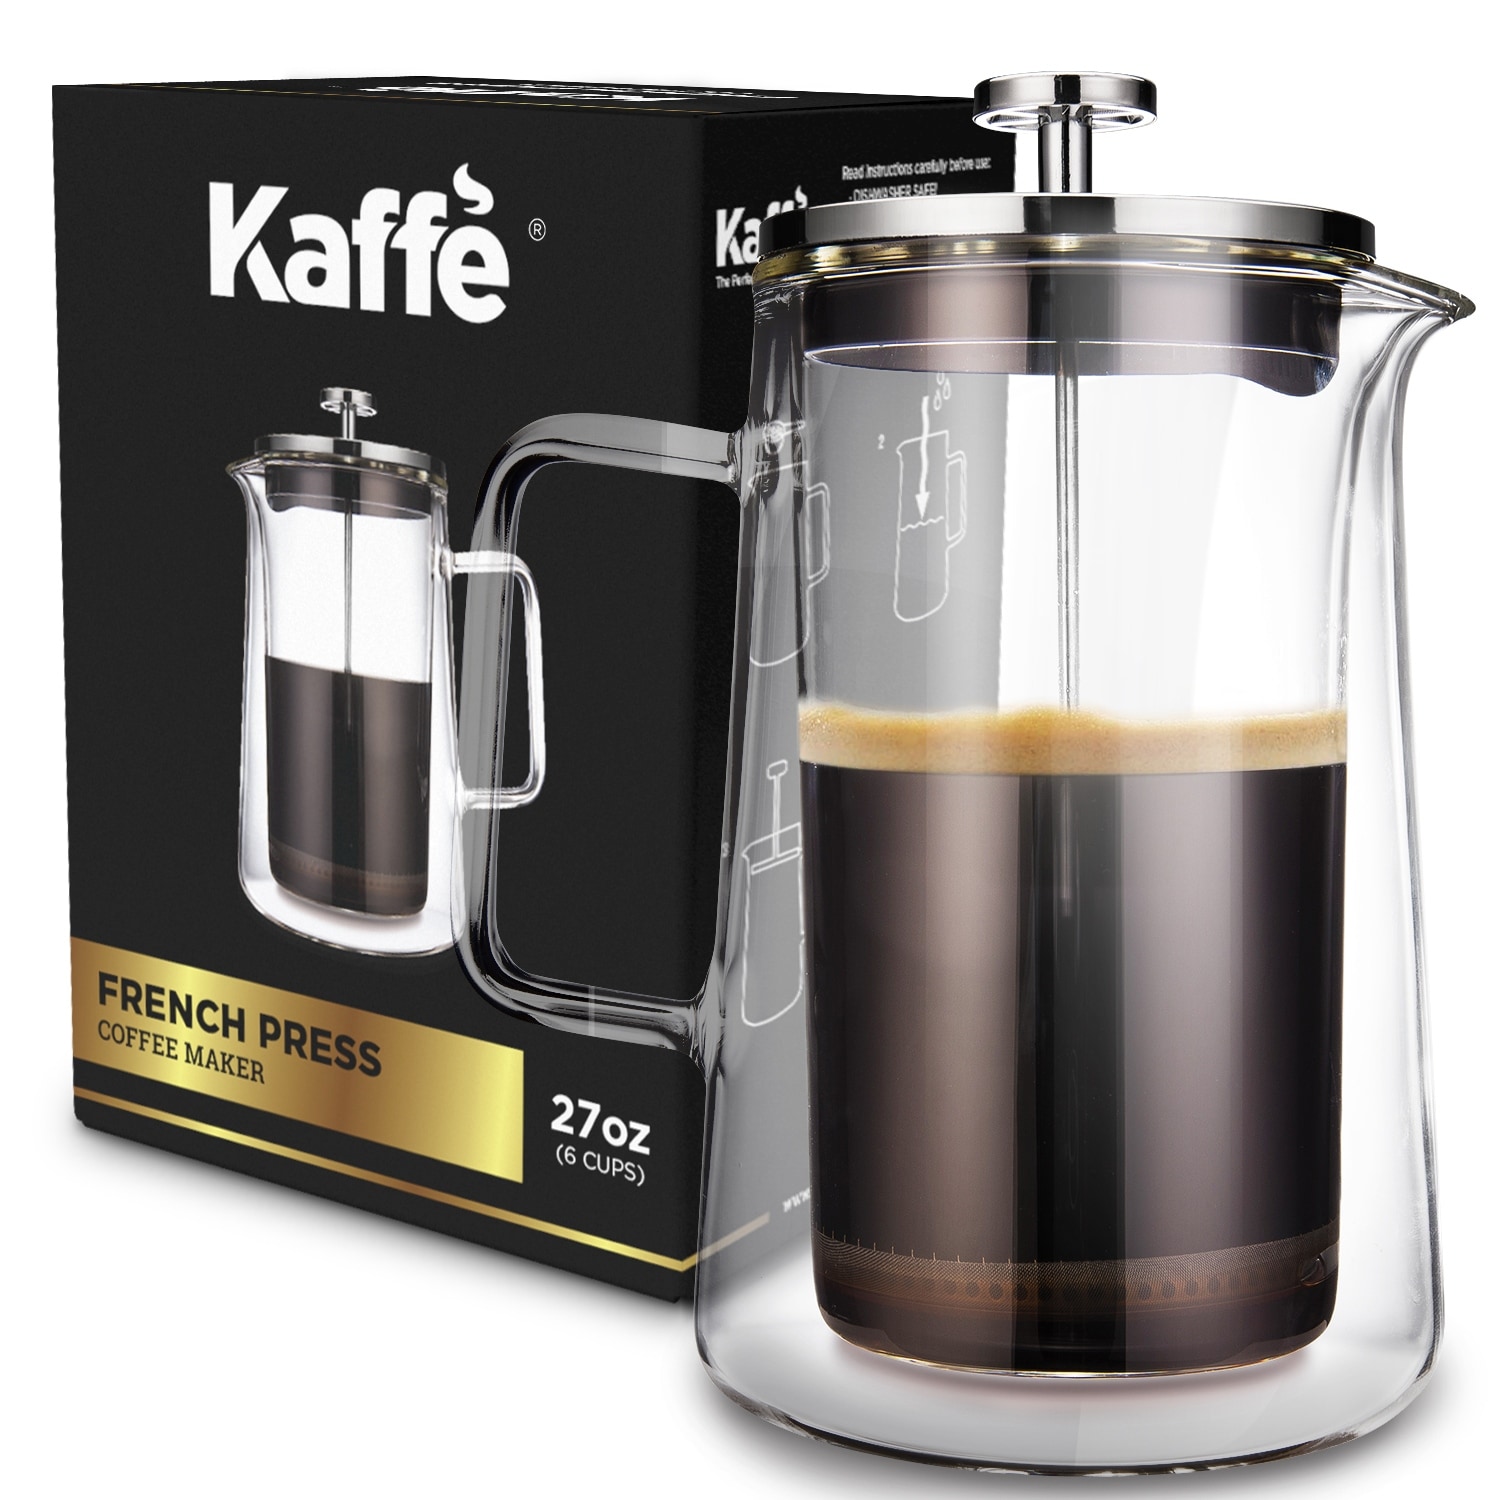 https://ak1.ostkcdn.com/images/products/is/images/direct/e5d5d598d2b73e88d646022c5e5ac53de8e92205/Kaffe-KF1010-French-Press-Coffee-Maker.-Double-Wall-Borosilicate-Glass.-%2827oz---0.8L%29-6-cup.jpg